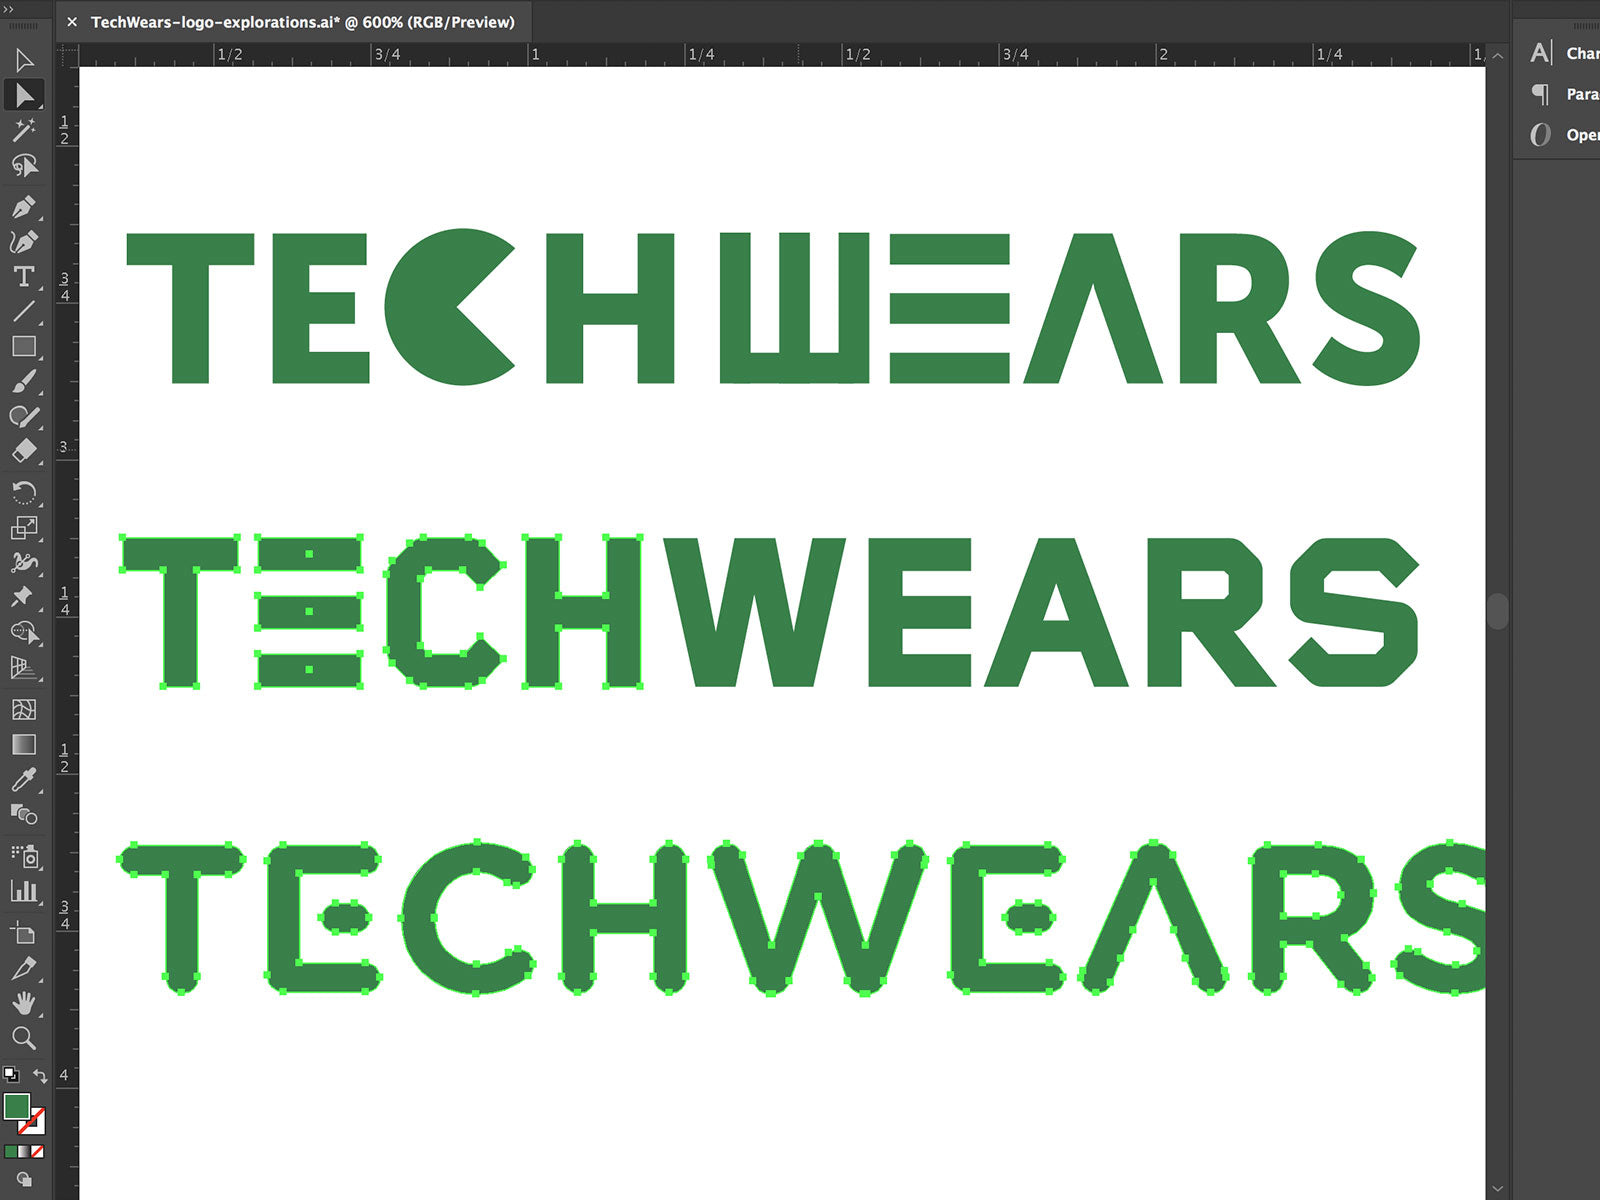 Typography sketches for TechWears logo